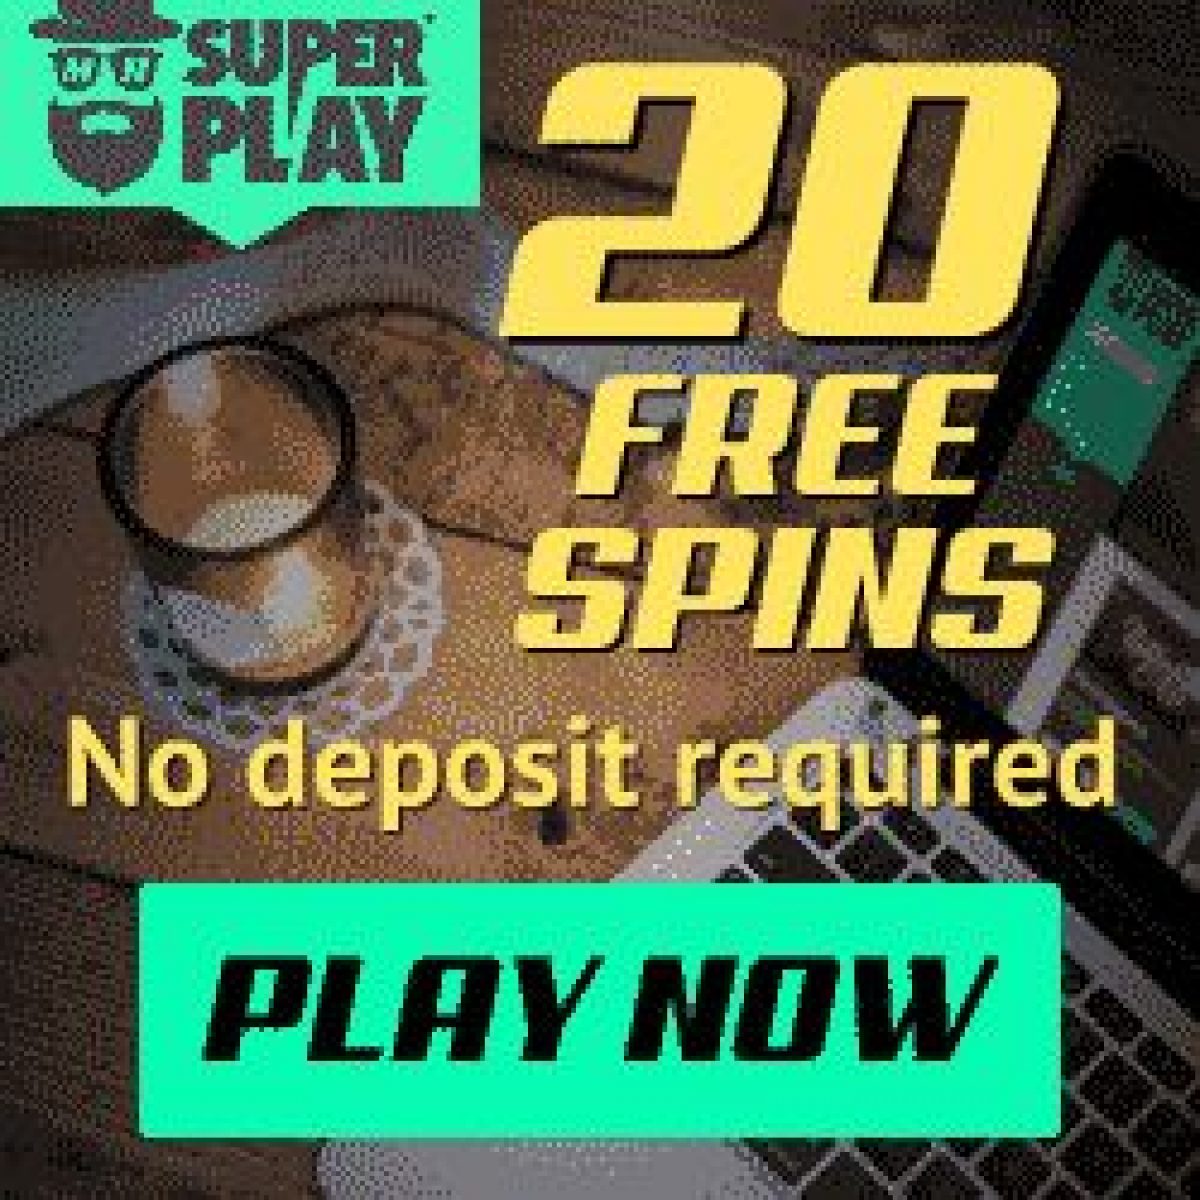 Mr superplay casino review